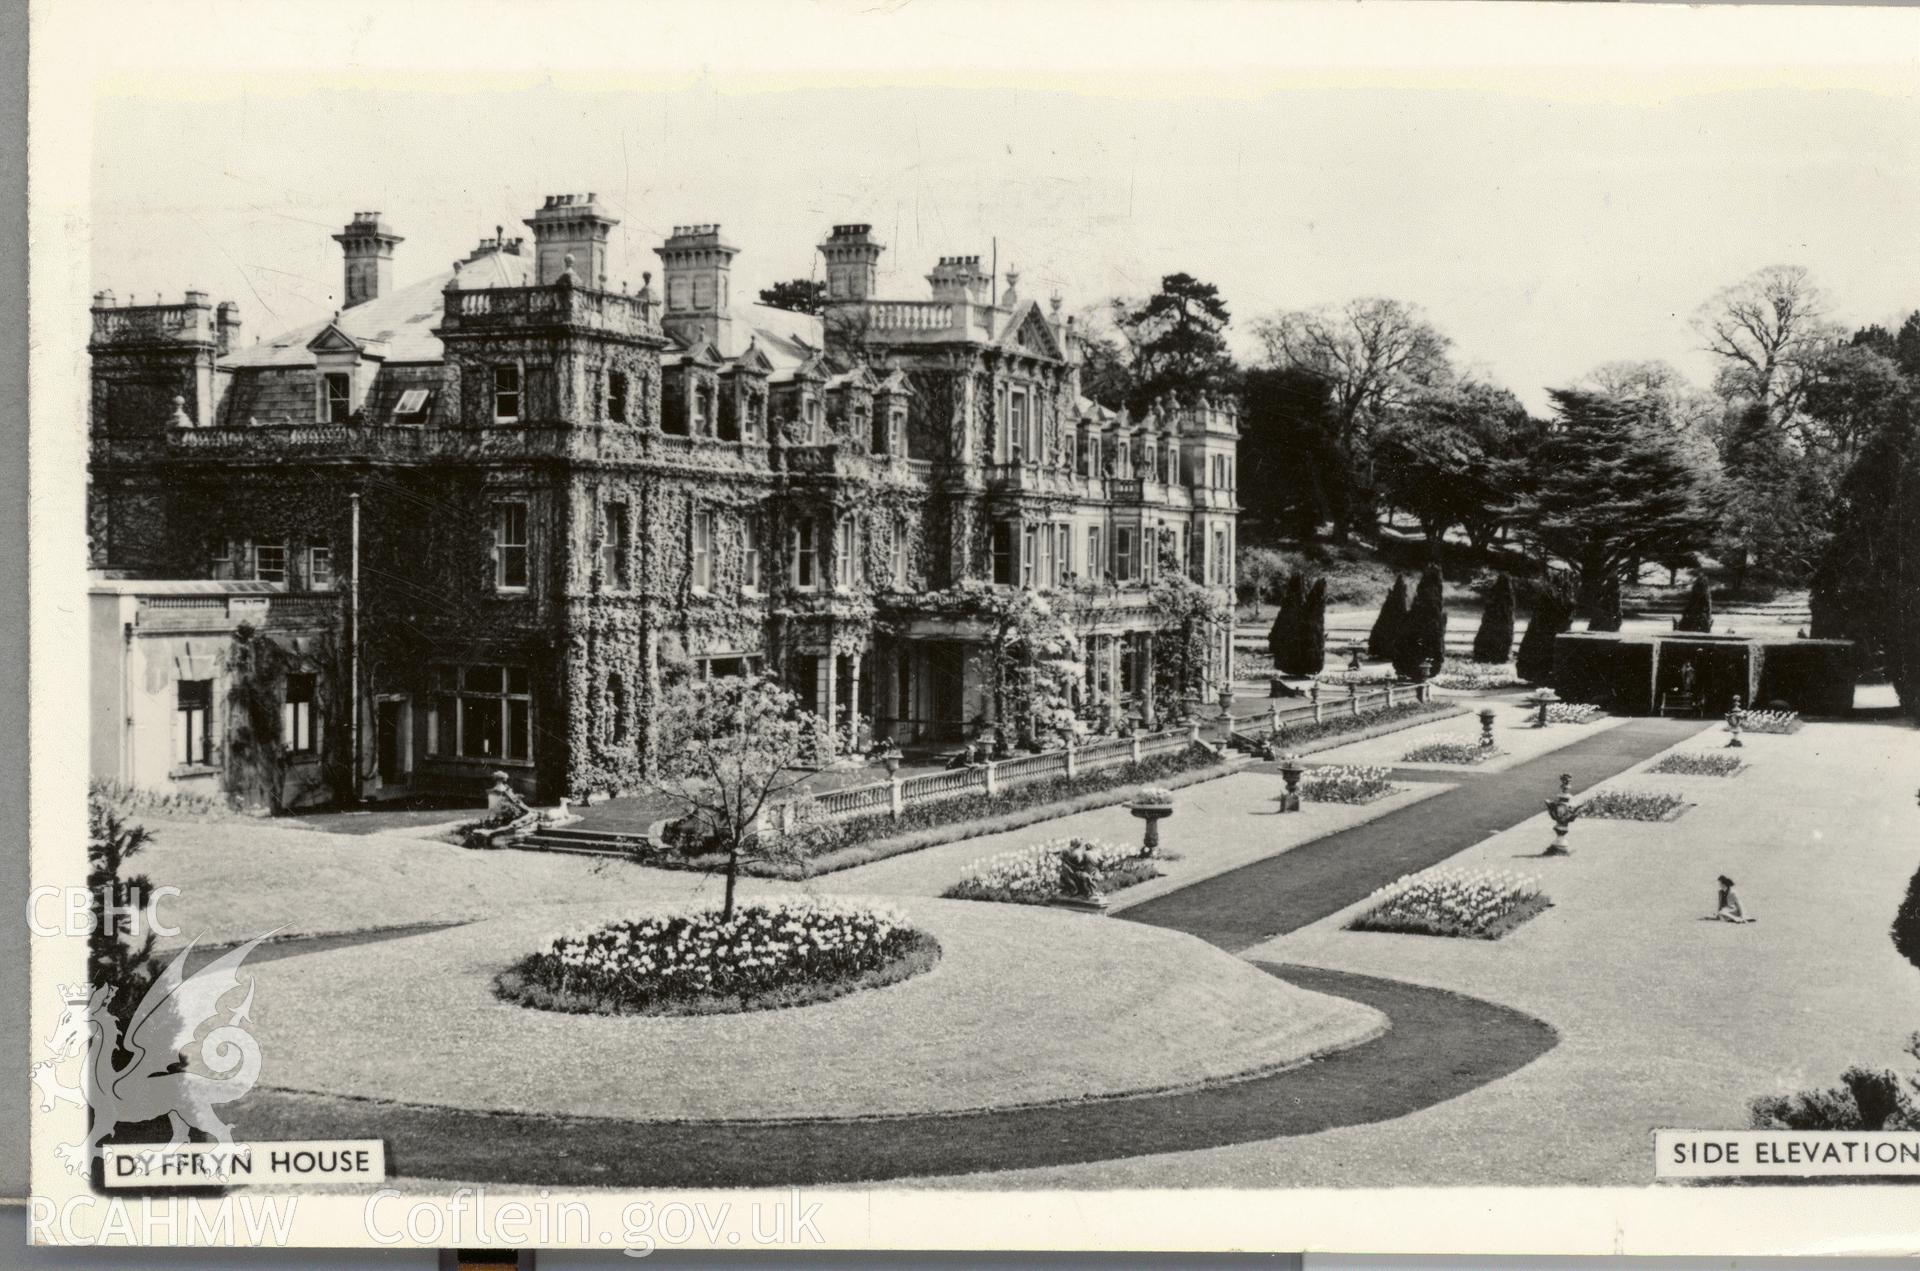 Digitised postcard image of Dyffryn house, St Nicholas and Bonvilston. Produced by Parks and Gardens Data Services, from an original item in the Peter Davis Collection at Parks and Gardens UK. We hold only web-resolution images of this collection, suitable for viewing on screen and for research purposes only. We do not hold the original images, or publication quality scans.